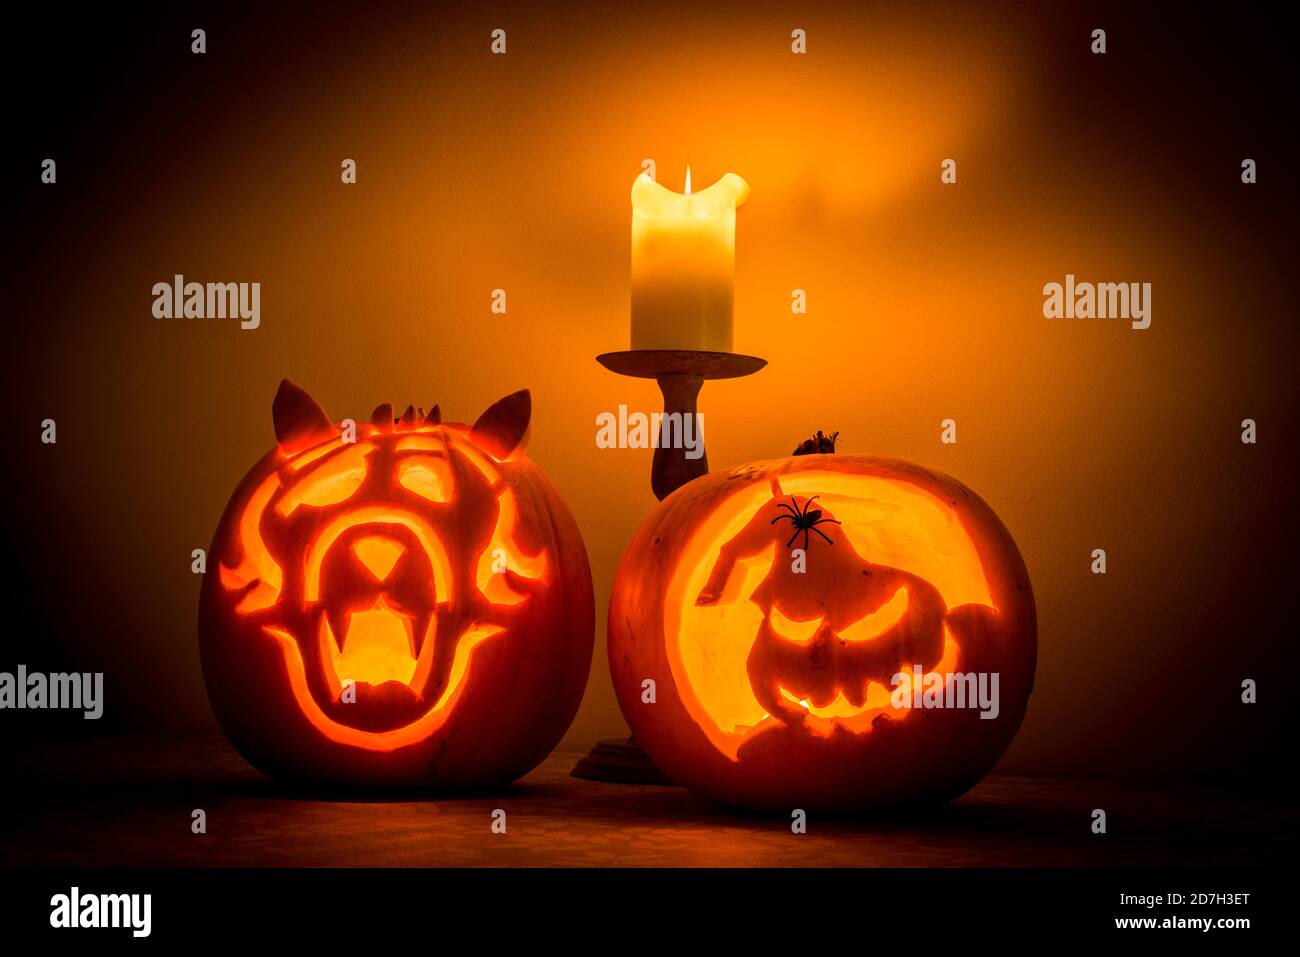 two carved pumpkins with candle creating spooky effect at halloween time Stock Photo